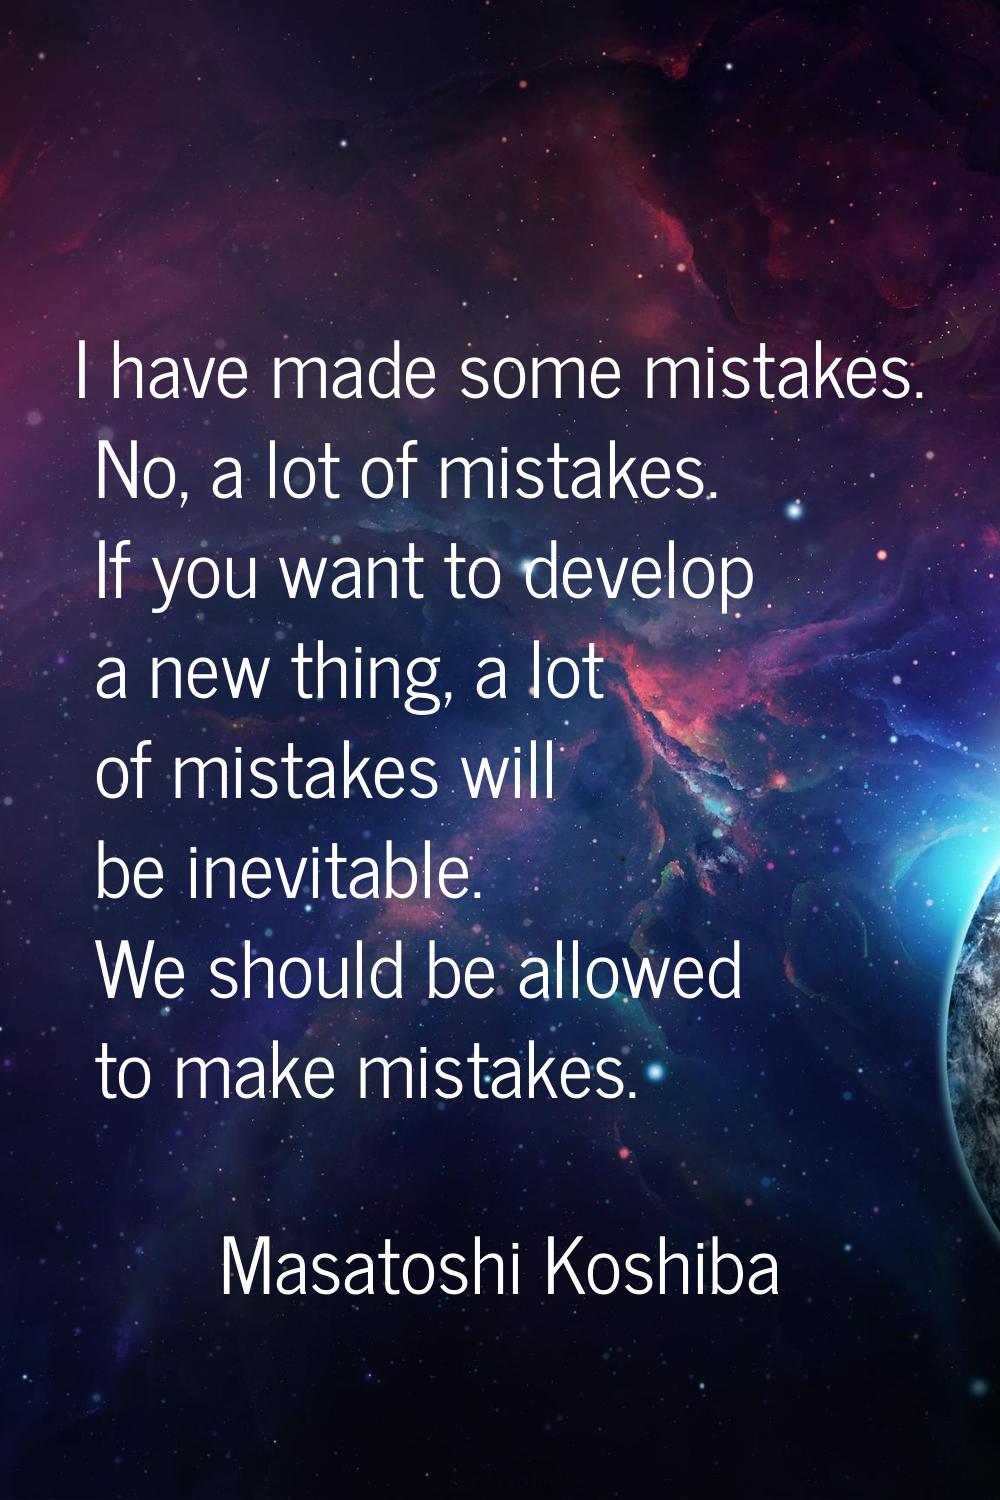 I have made some mistakes. No, a lot of mistakes. If you want to develop a new thing, a lot of mist